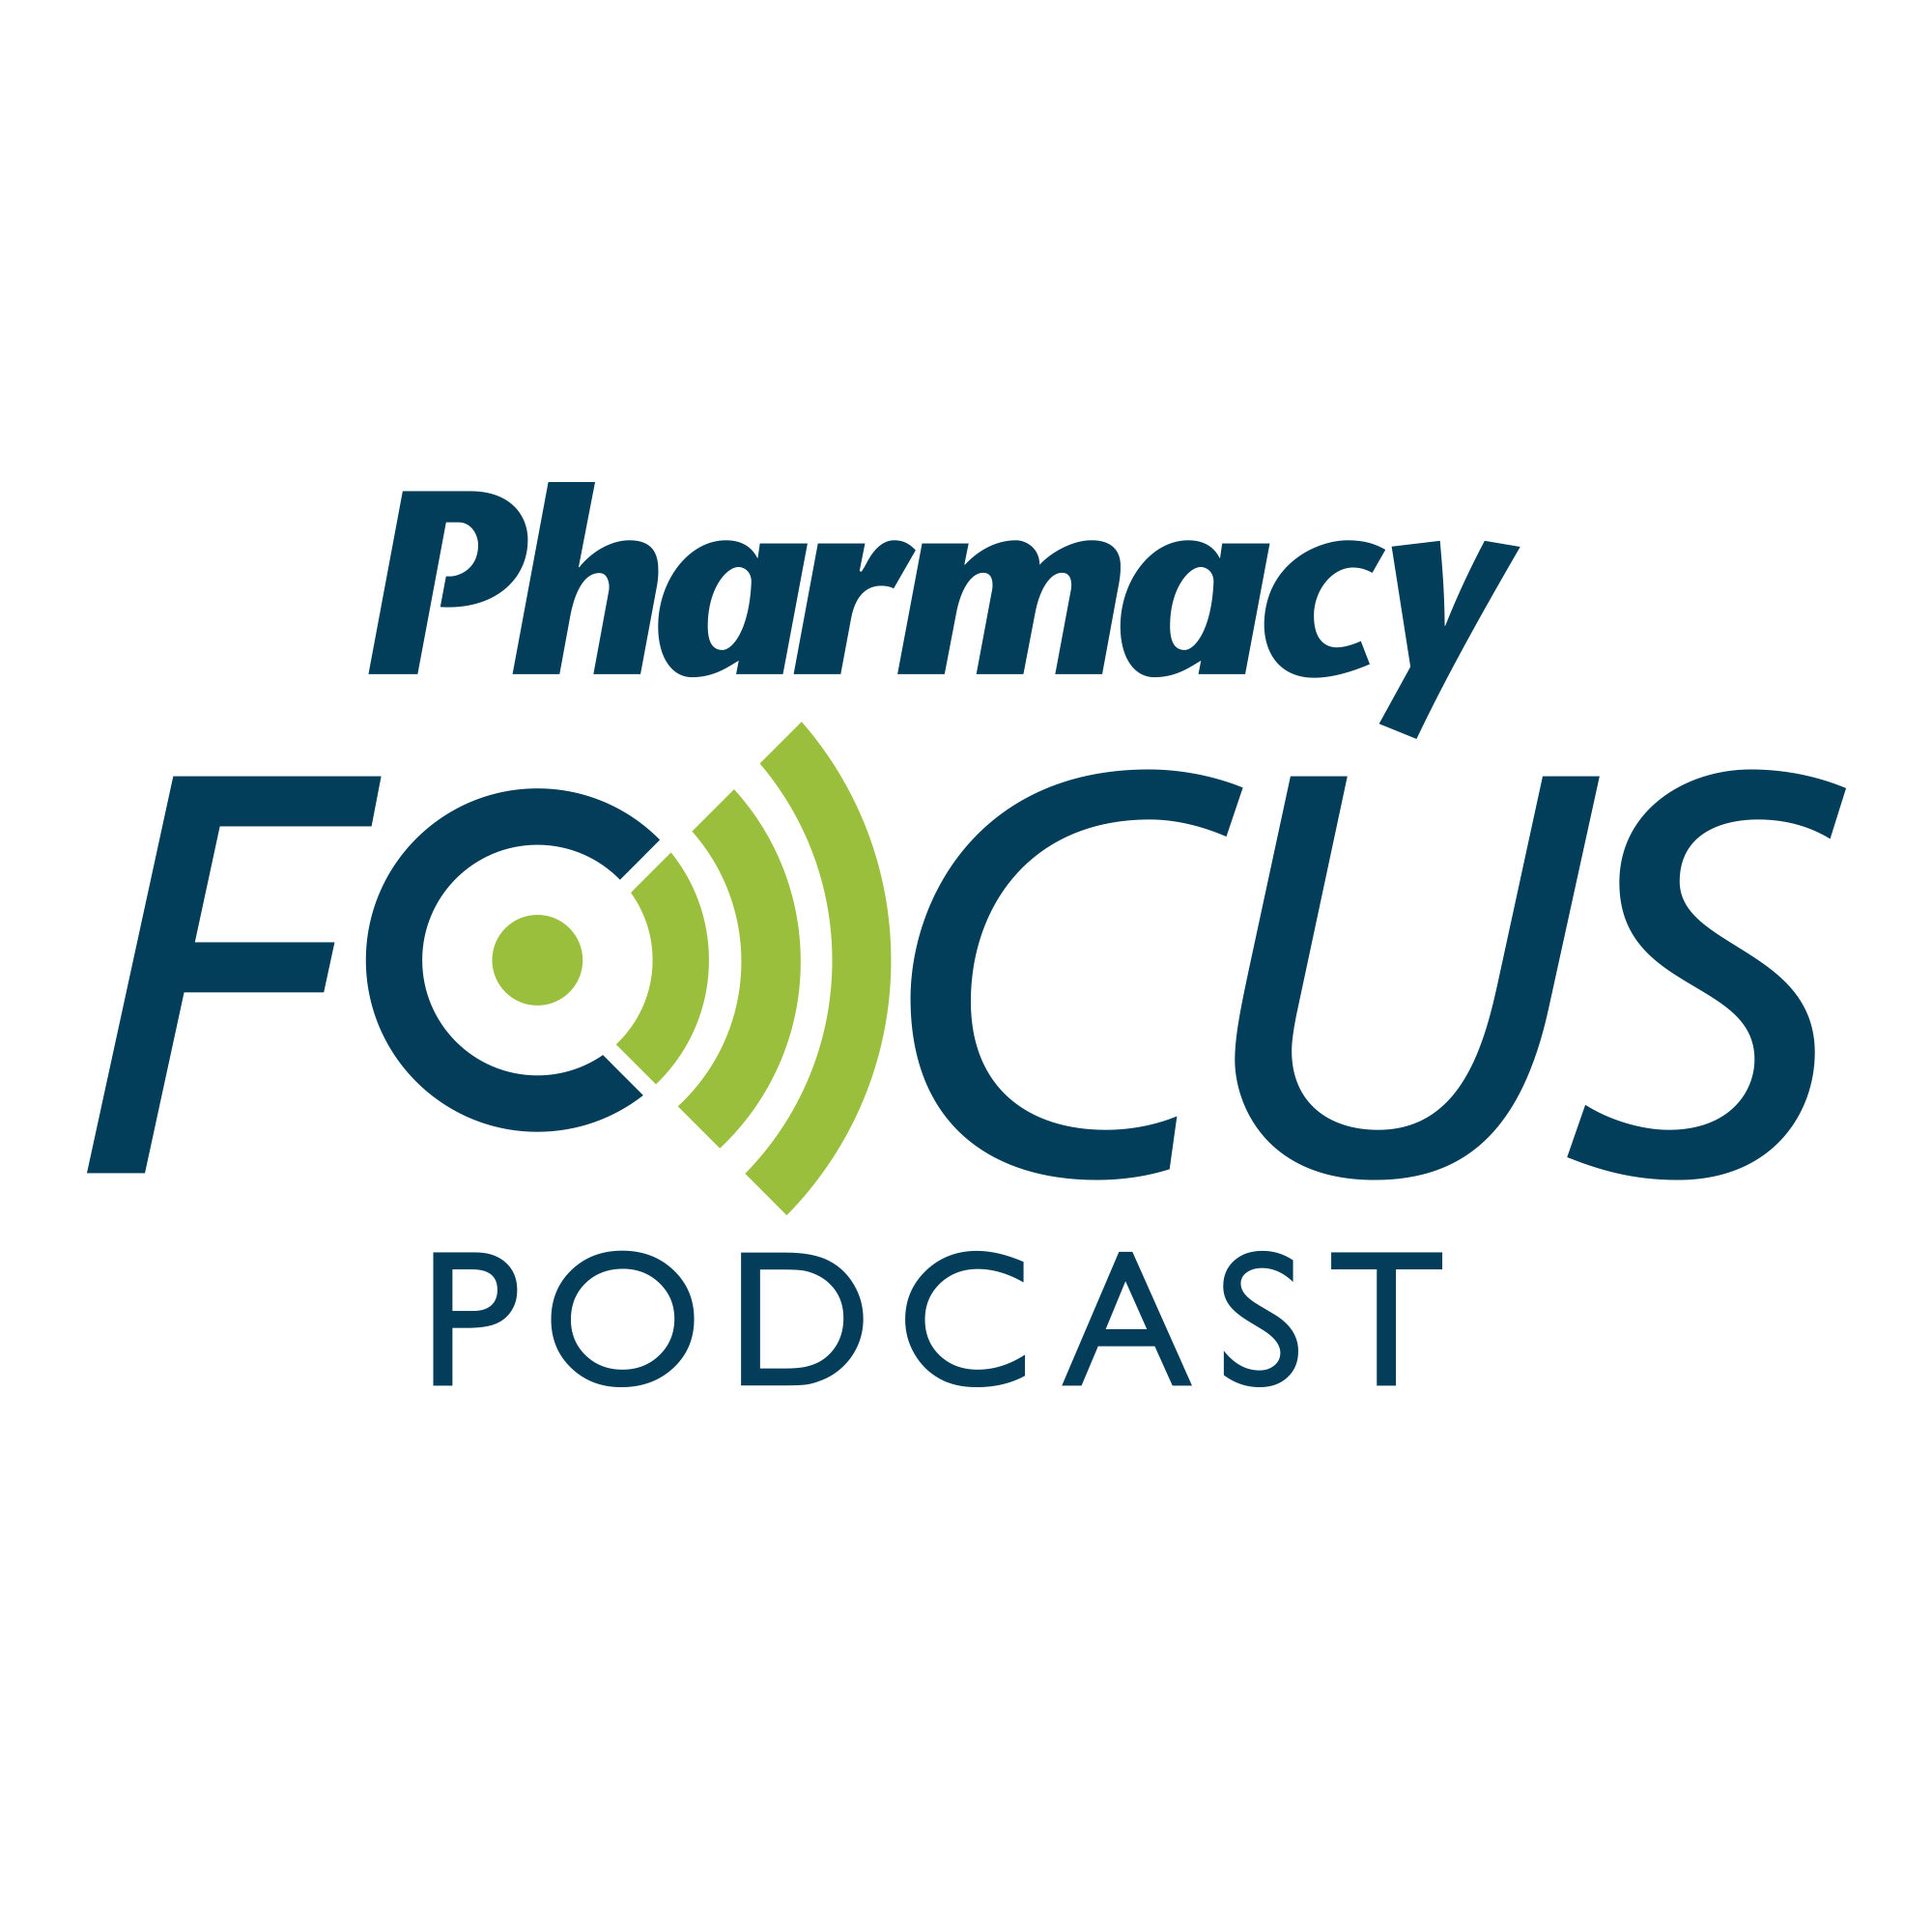 Pharmacy Focus Episode 50: Roe vs Wade and Its Impact on Pharmacy